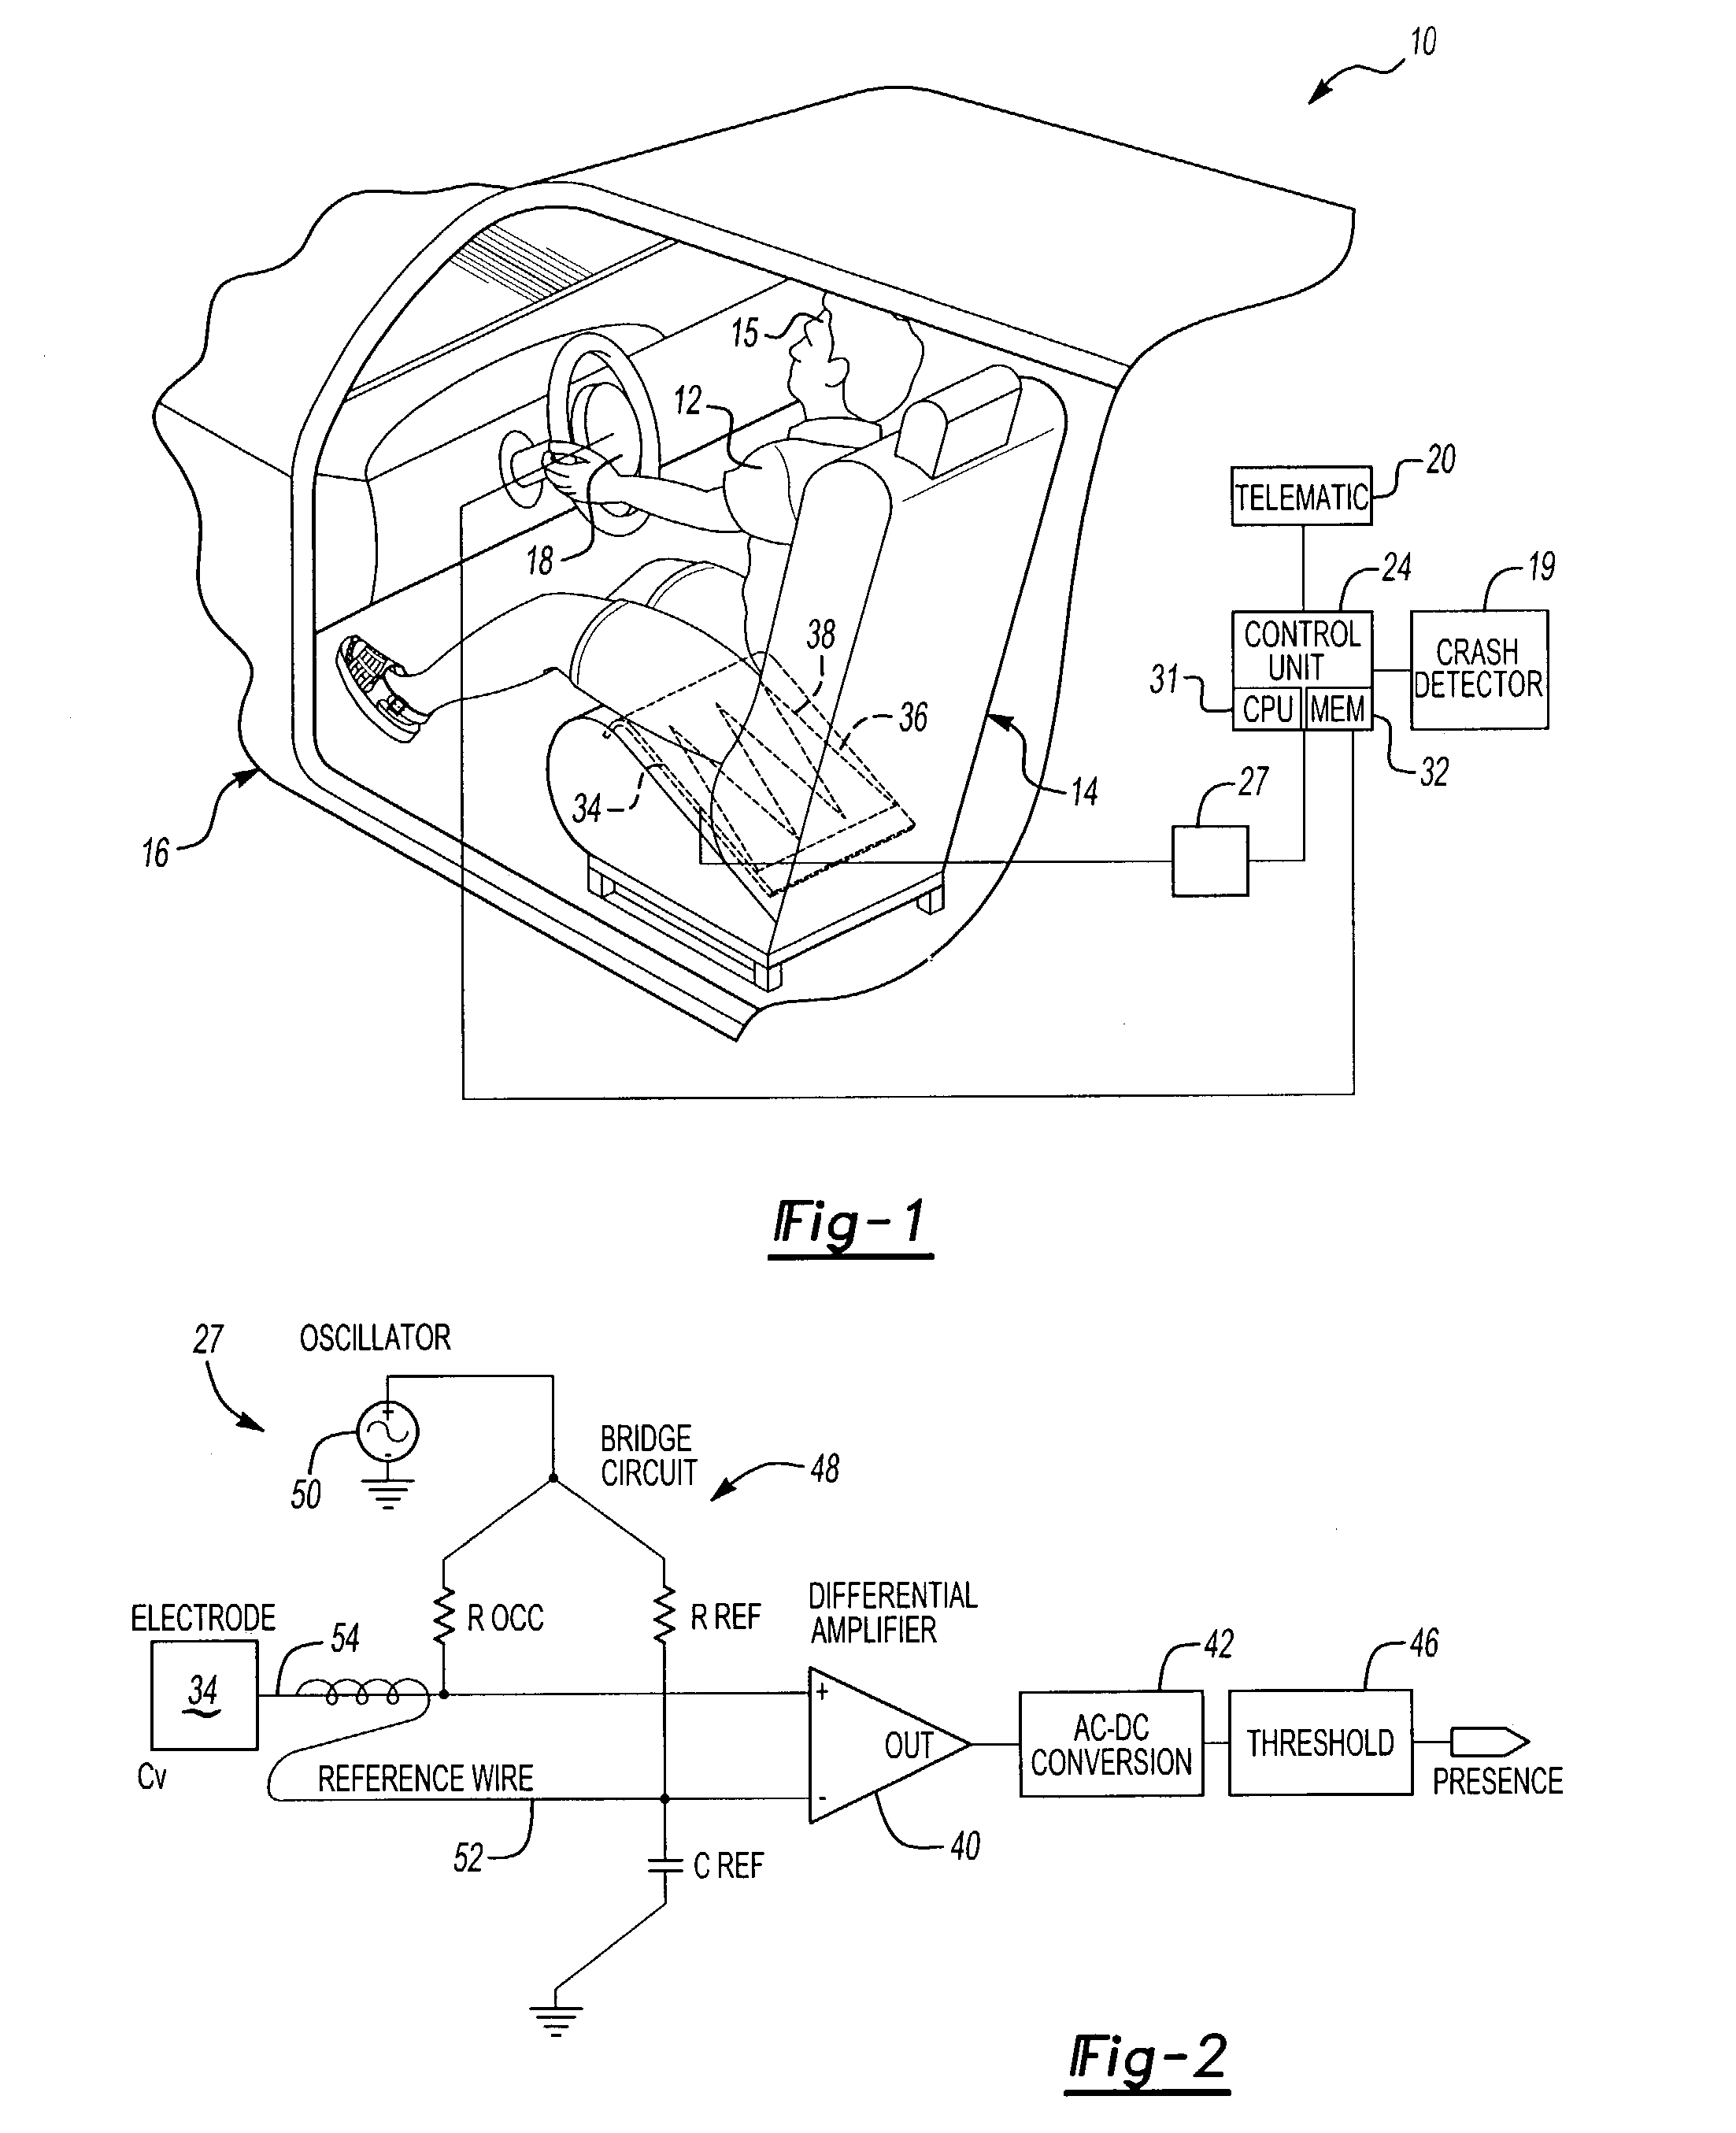 Occupant presence detection device